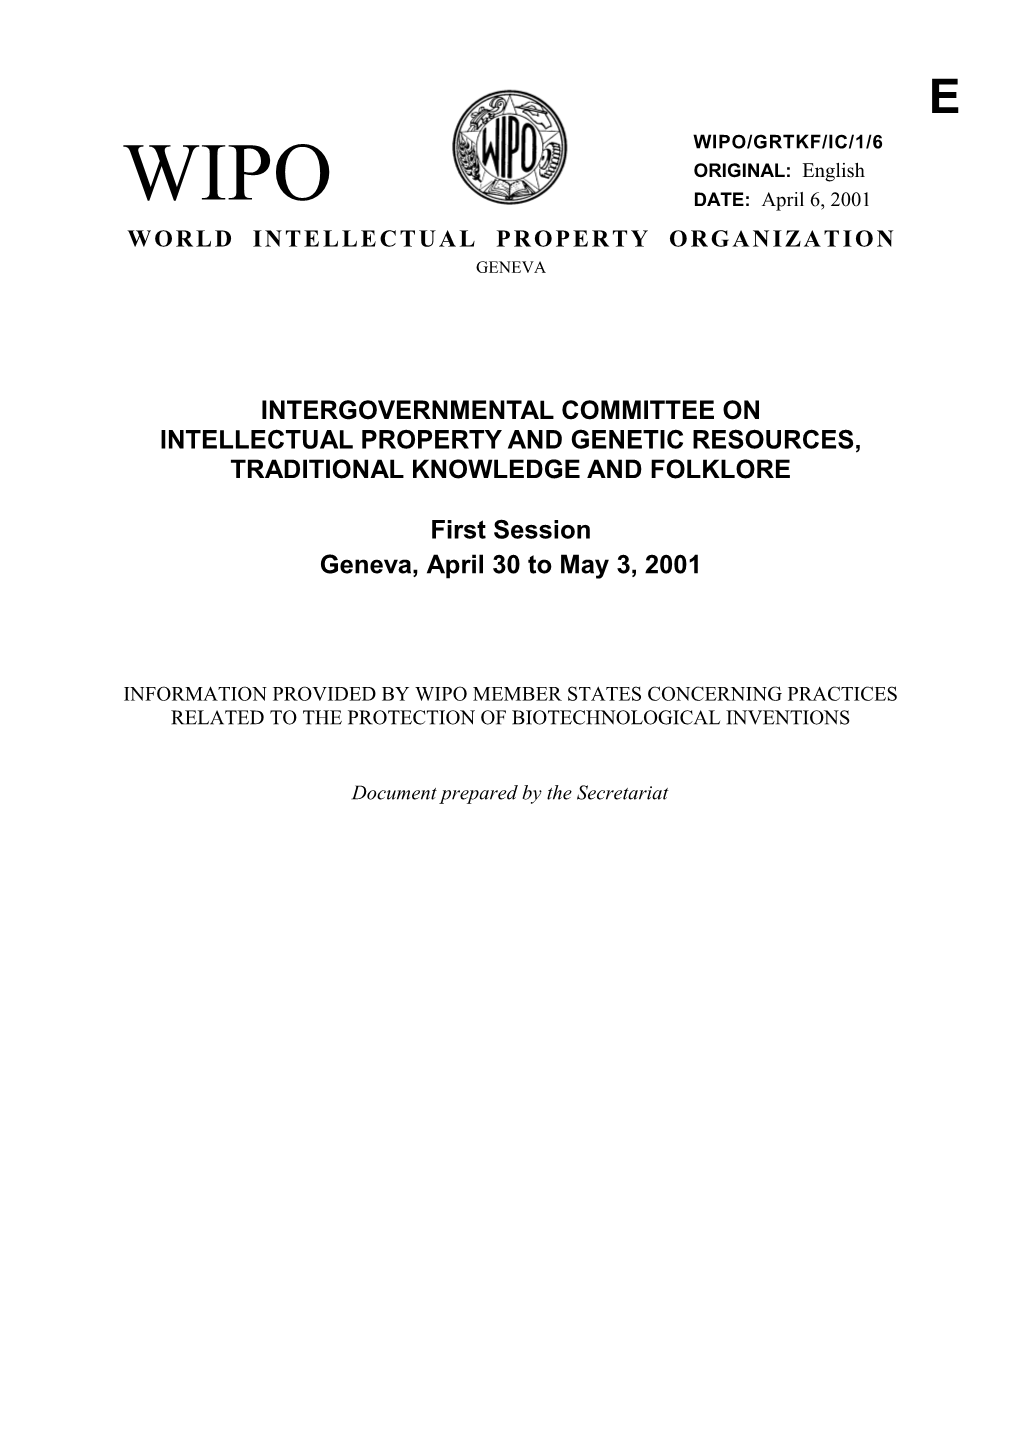 WIPO/GRTKF/IC/1/6: Information Provided by WIPO Member States Concerning Practices Related